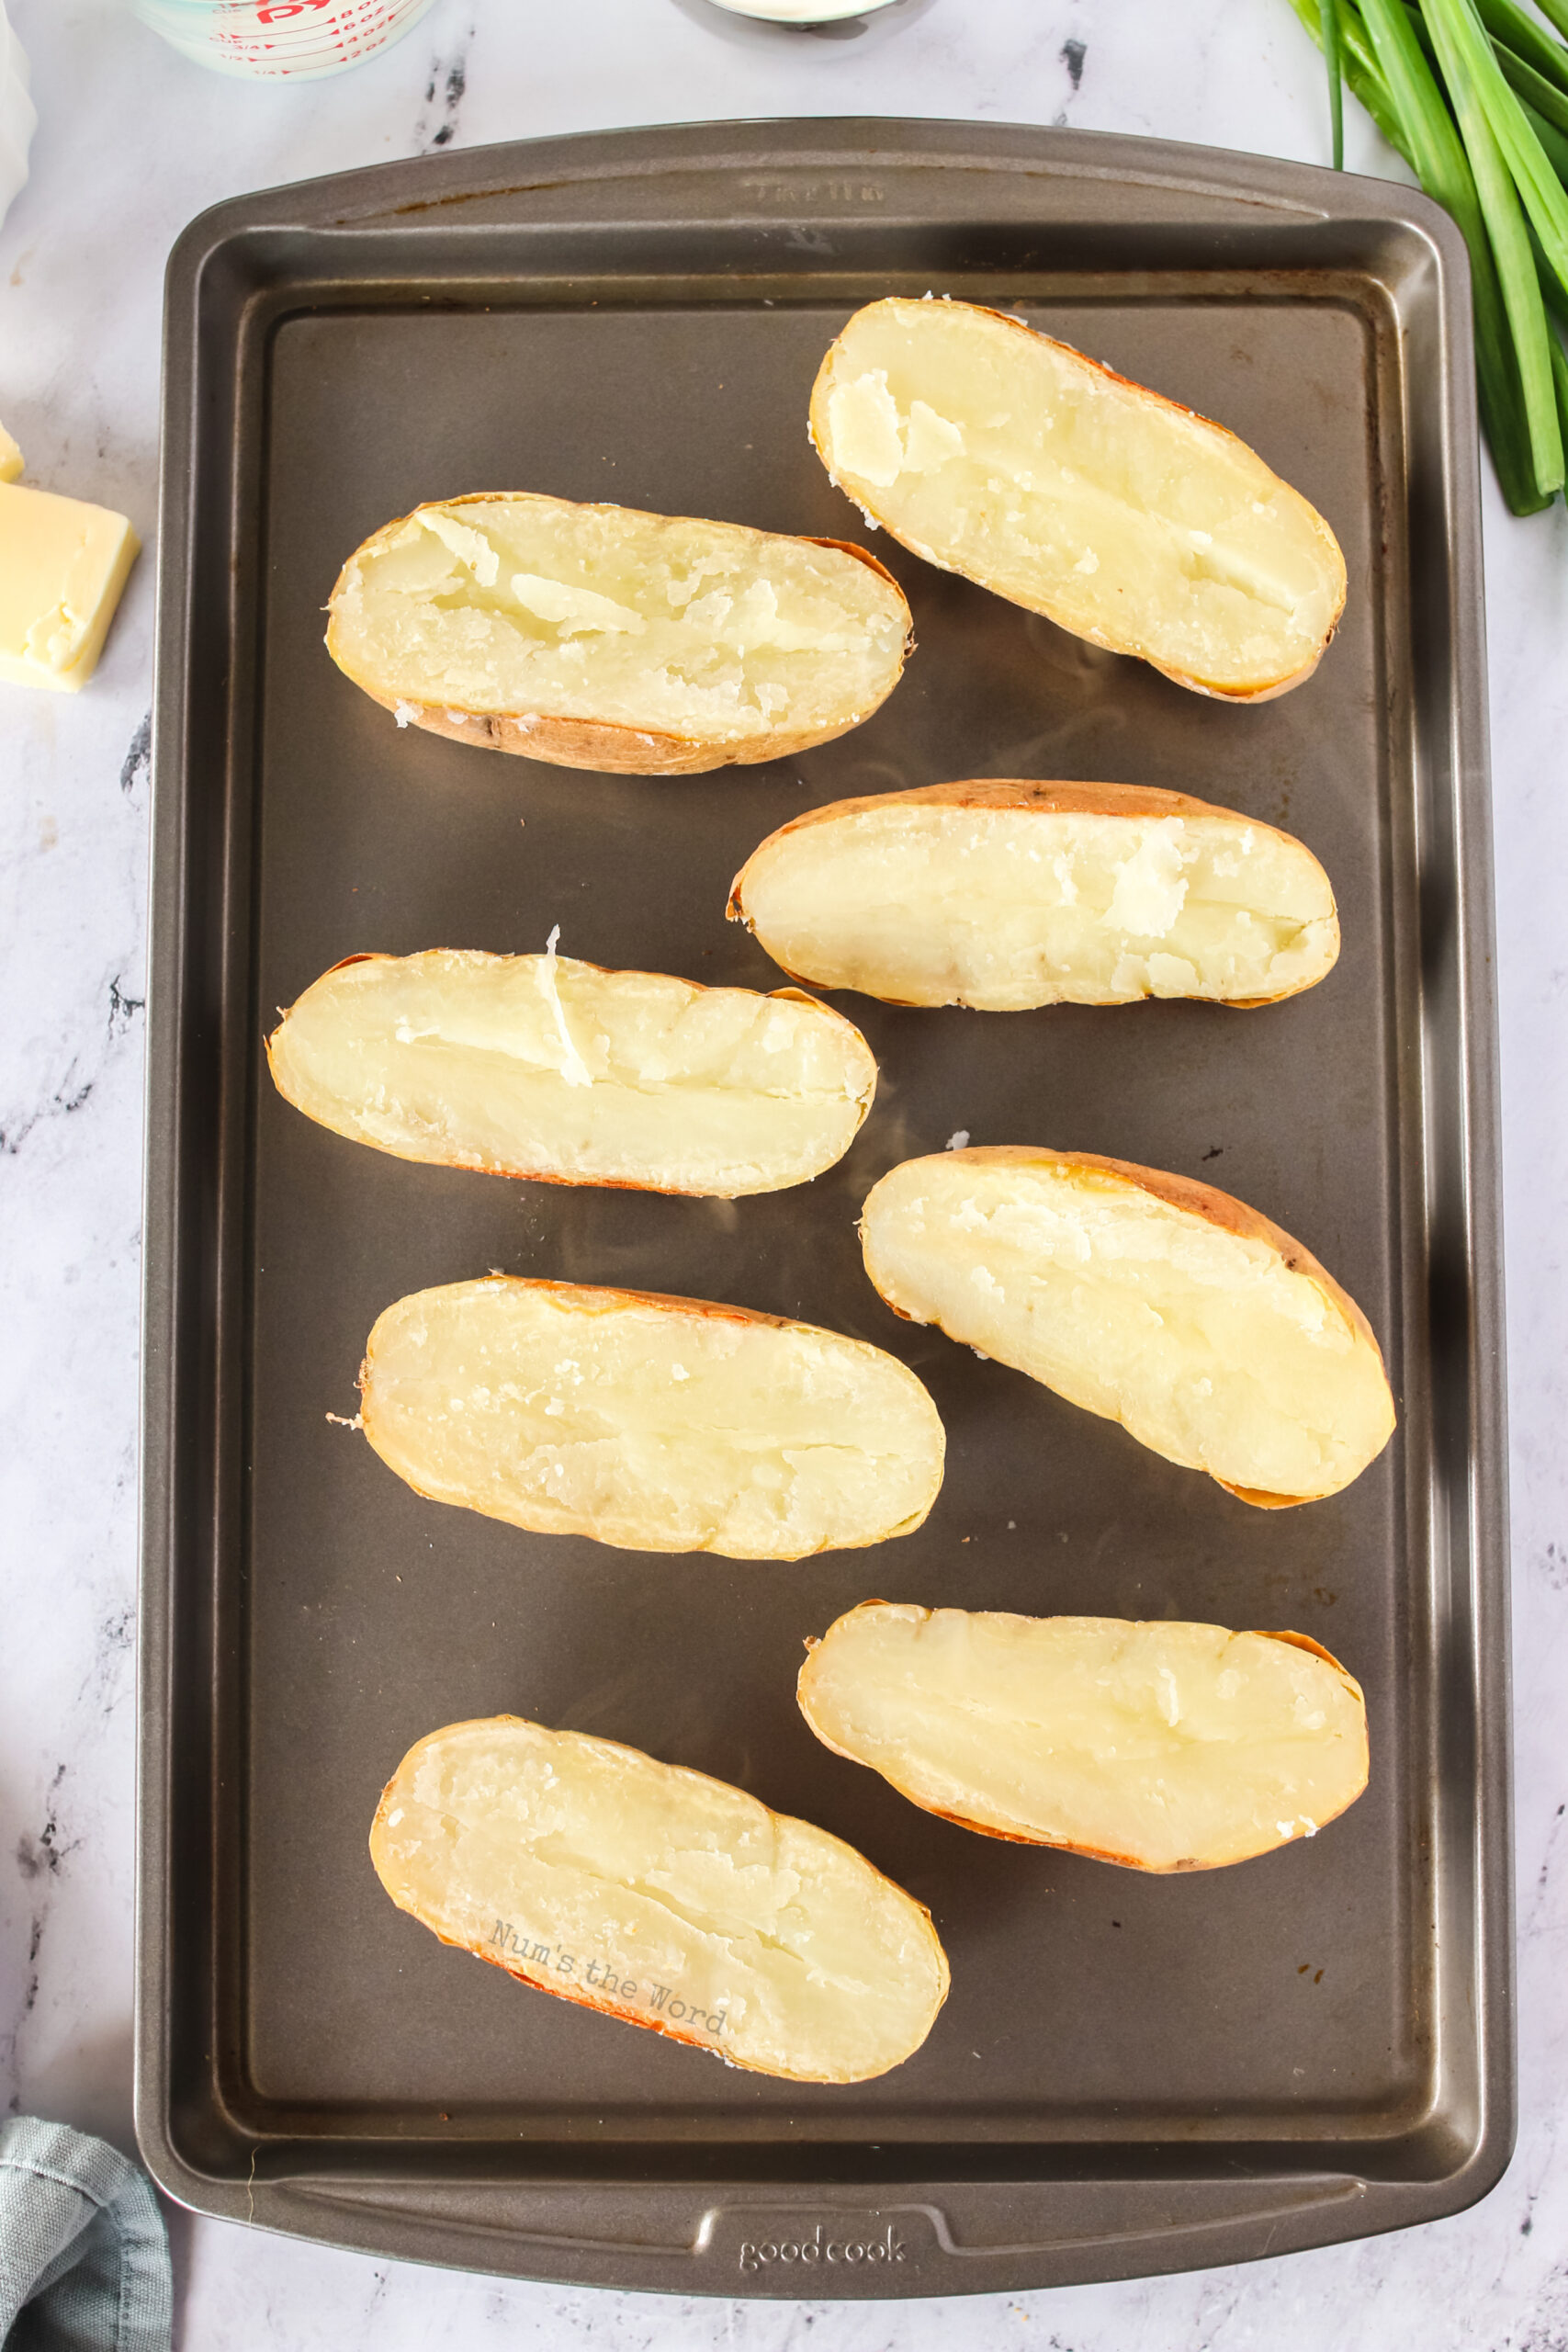 4 baked potatoes are split in half on a cookie sheet